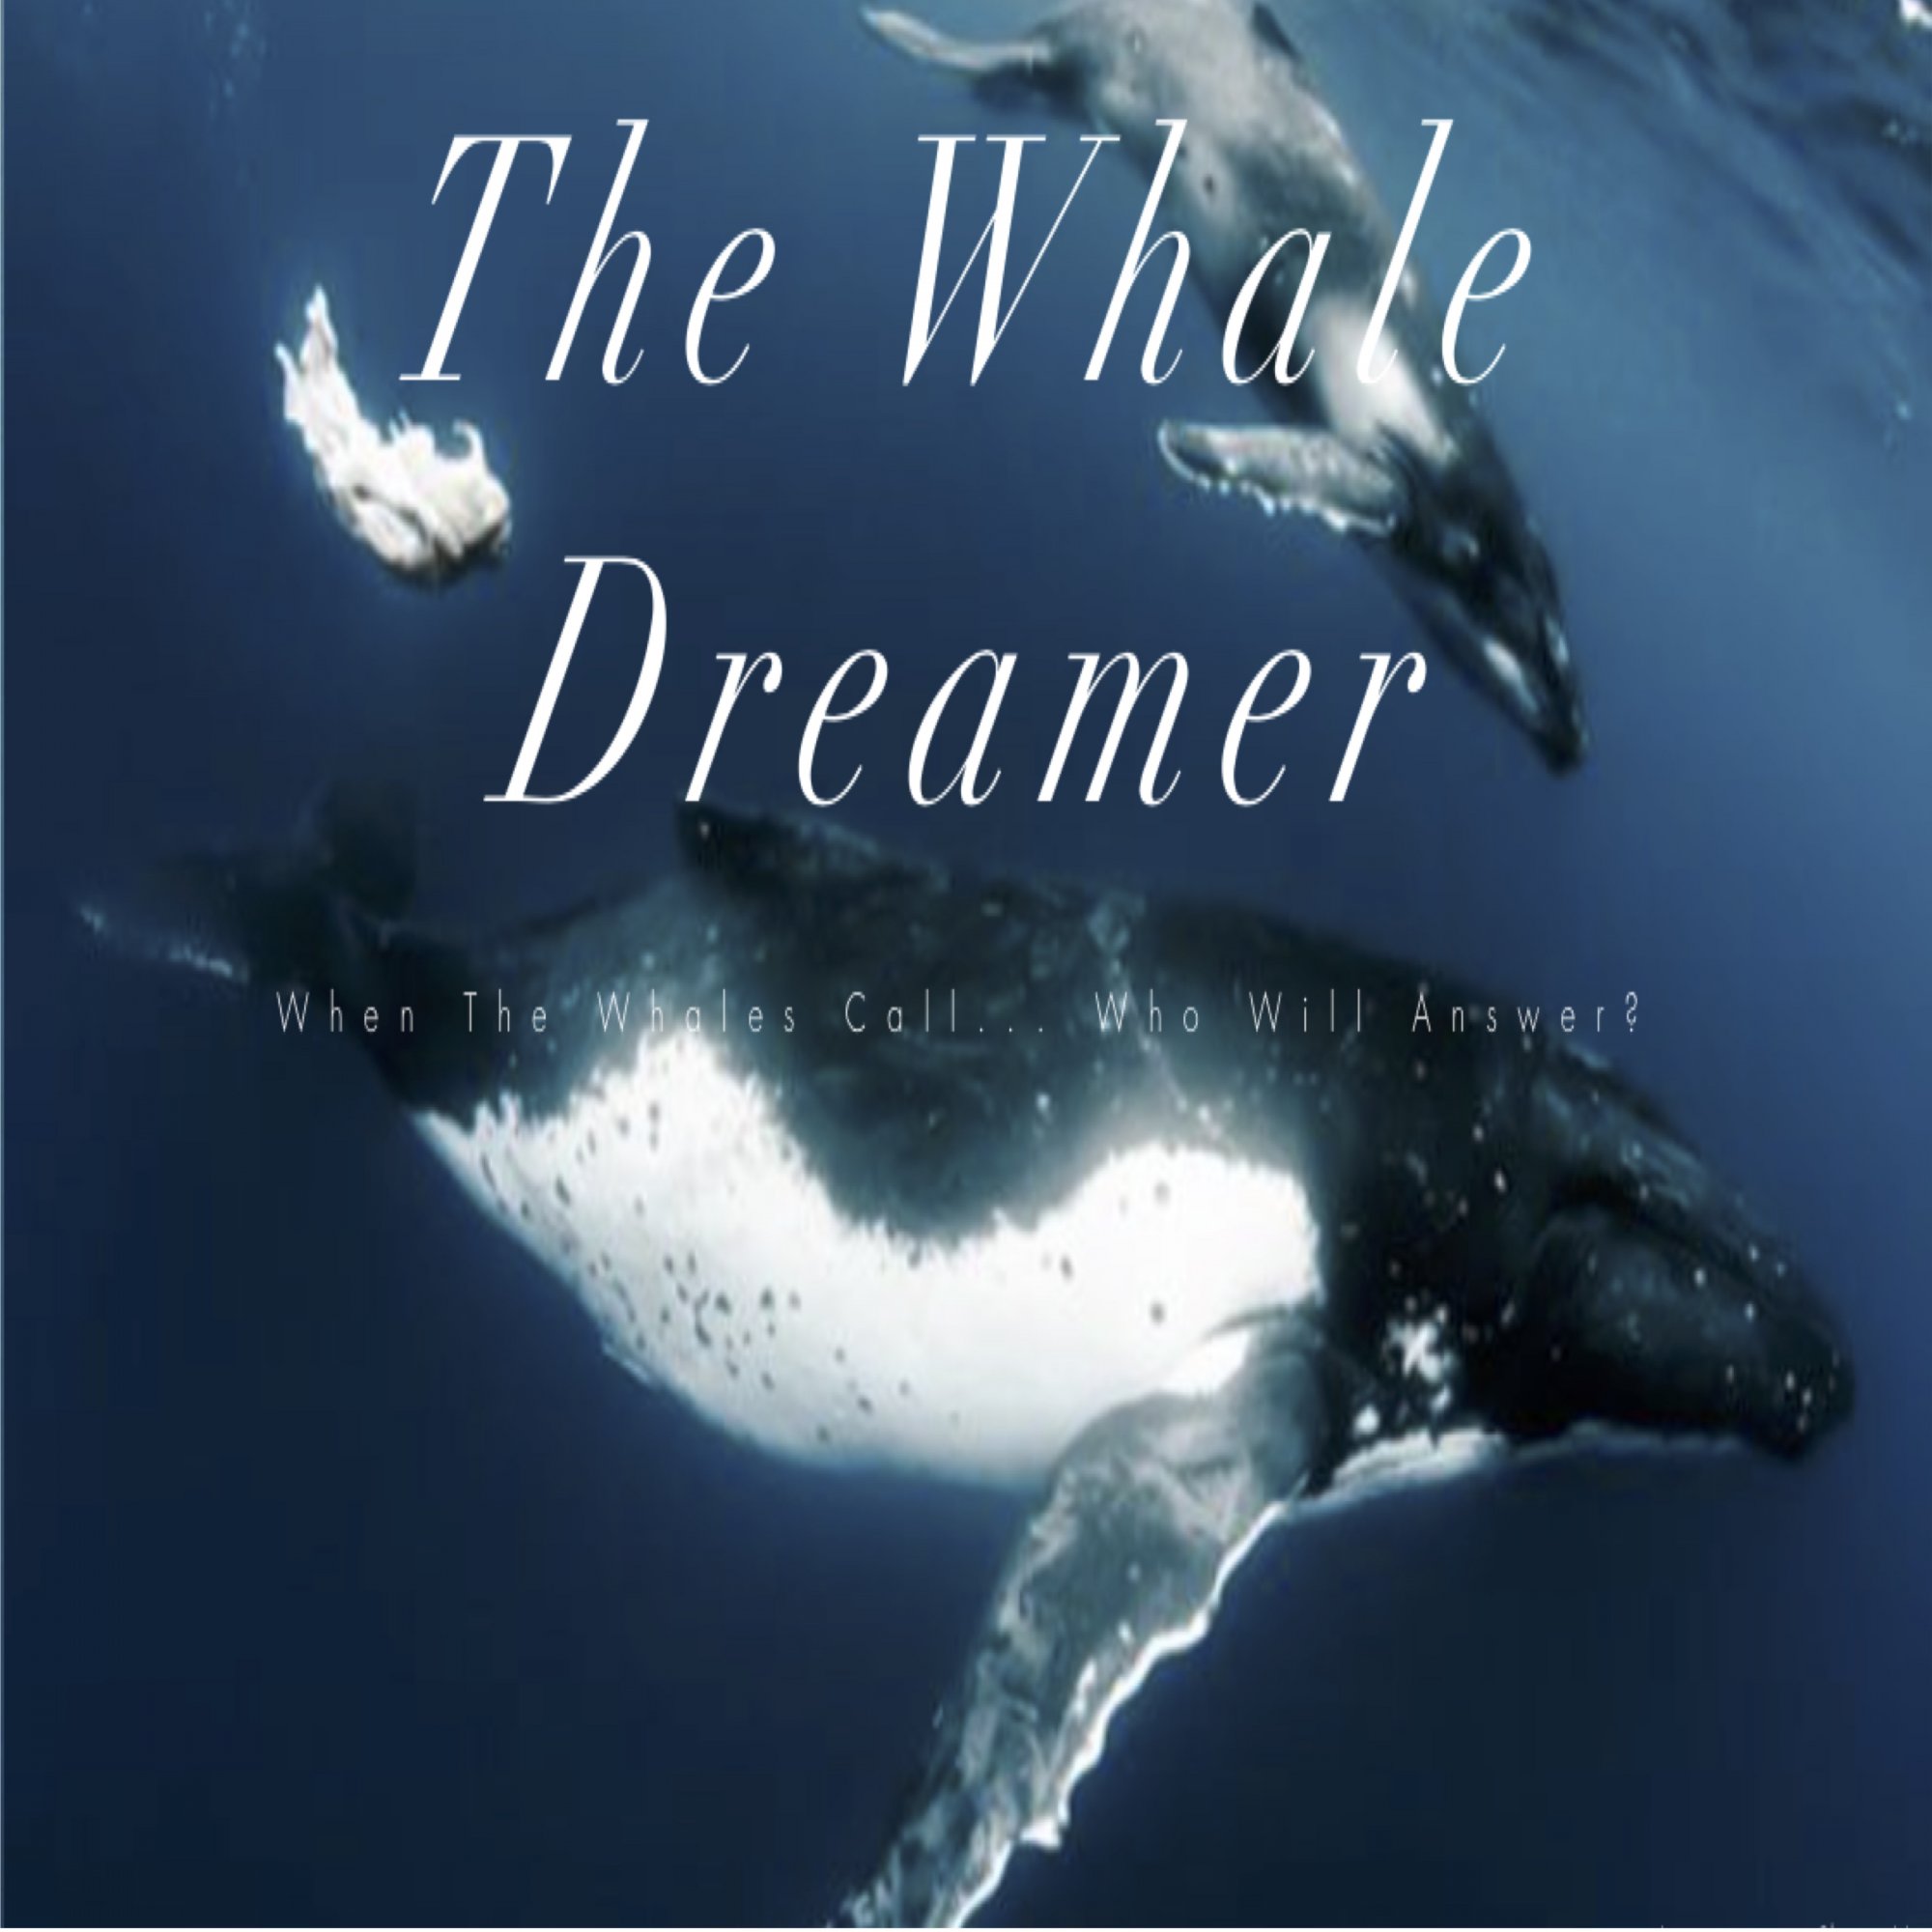 Grant Report Interview with Leah Lamb of Whale Dreamer